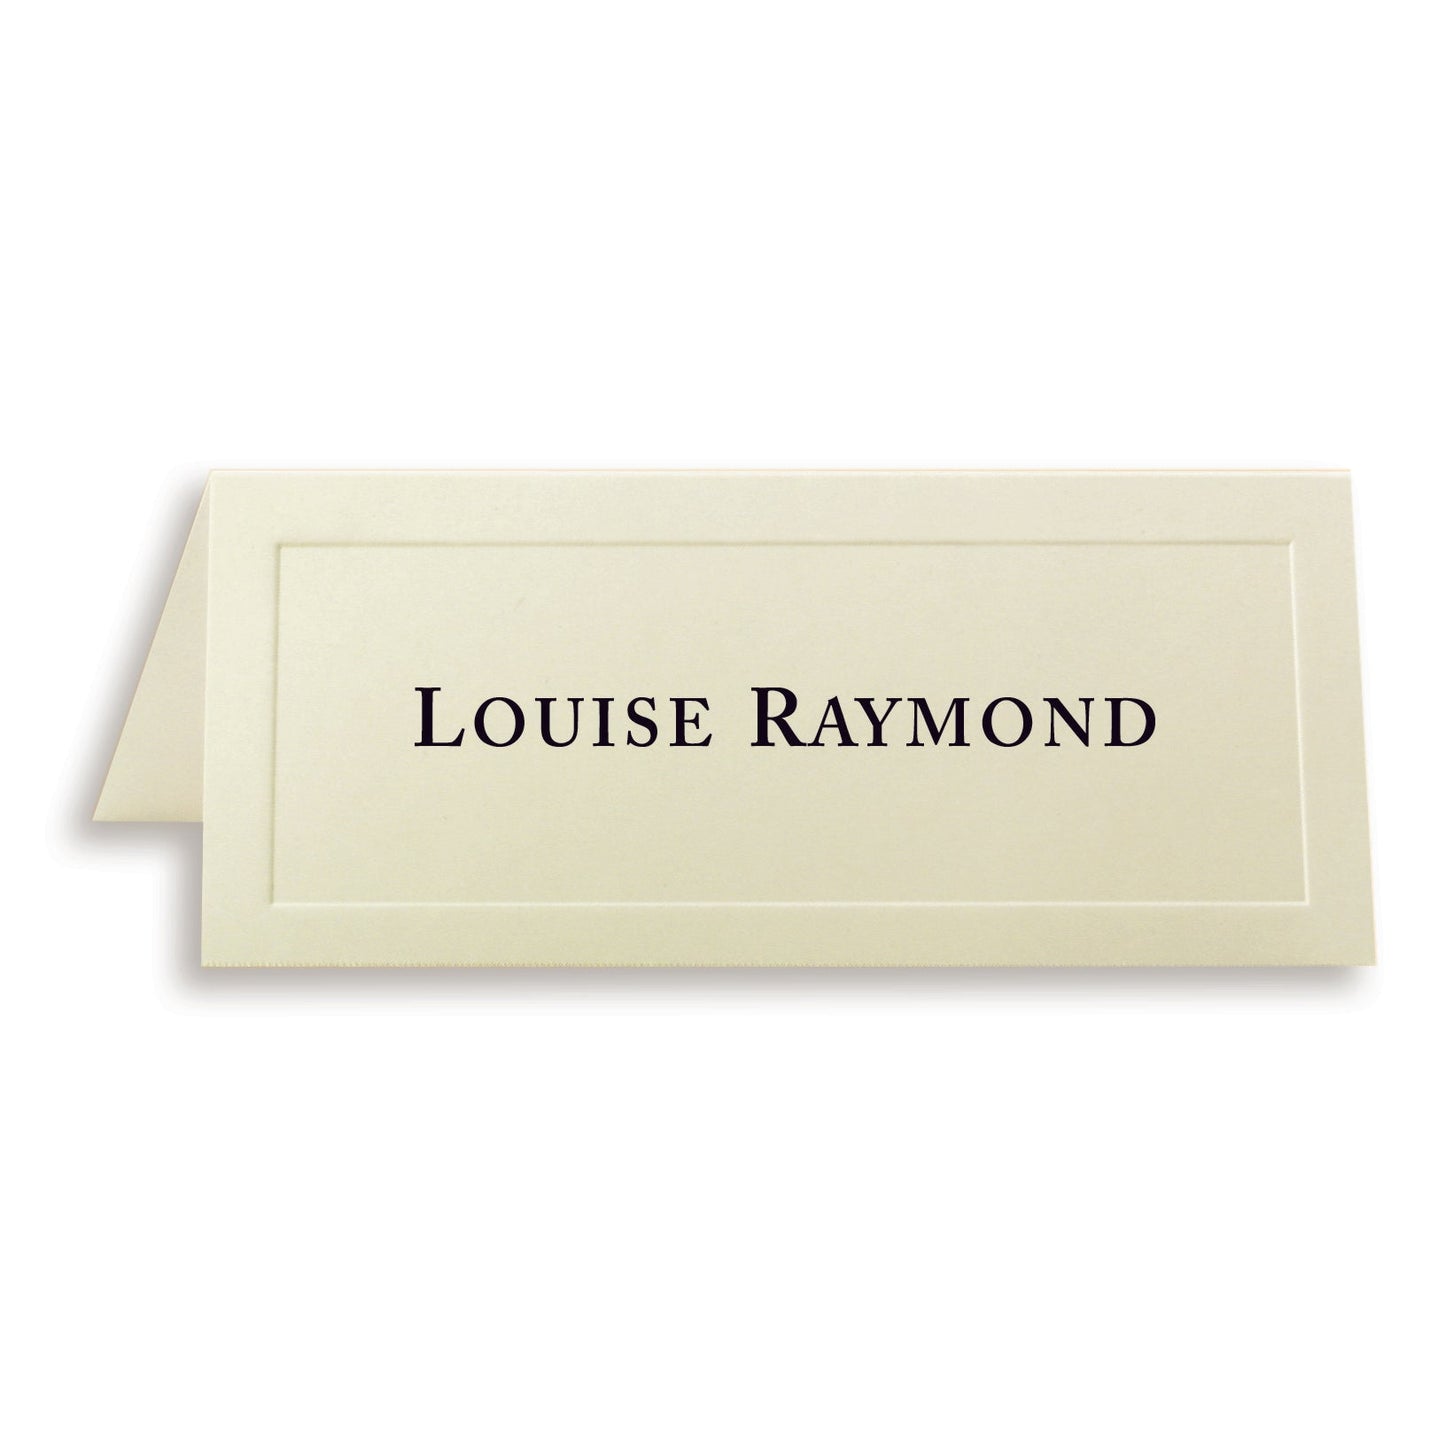 St. James® Overtures® Traditional Embossed Place Cards, Ivory, Pack of 1500